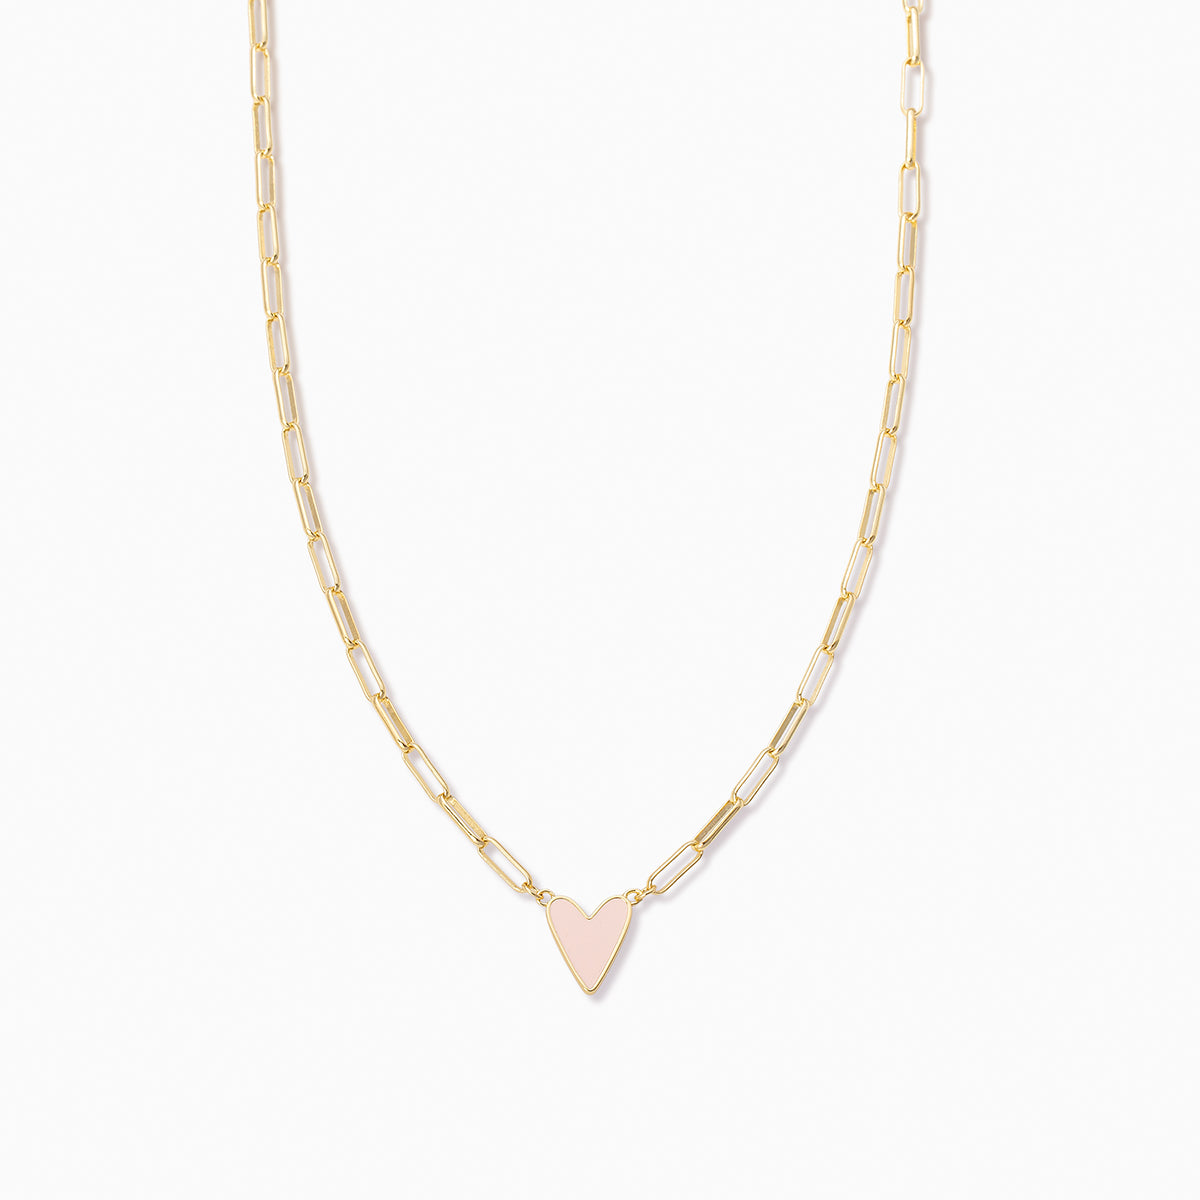 Enamel Heart Necklace | Gold Off White | Product Image | Uncommon James